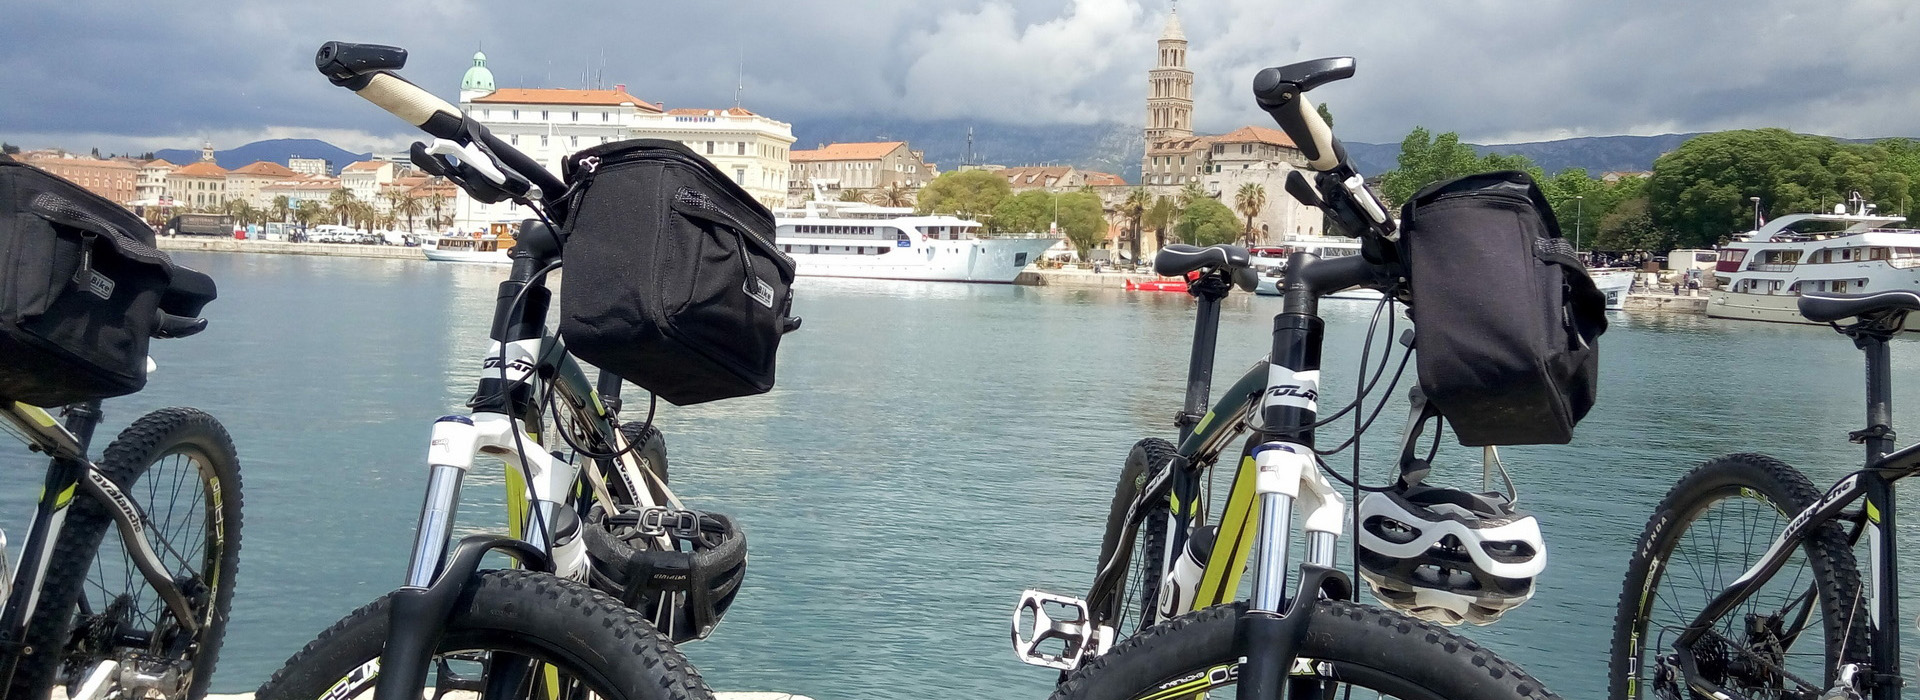 Cycling on the Dalmatian Coast guided holiday - Split